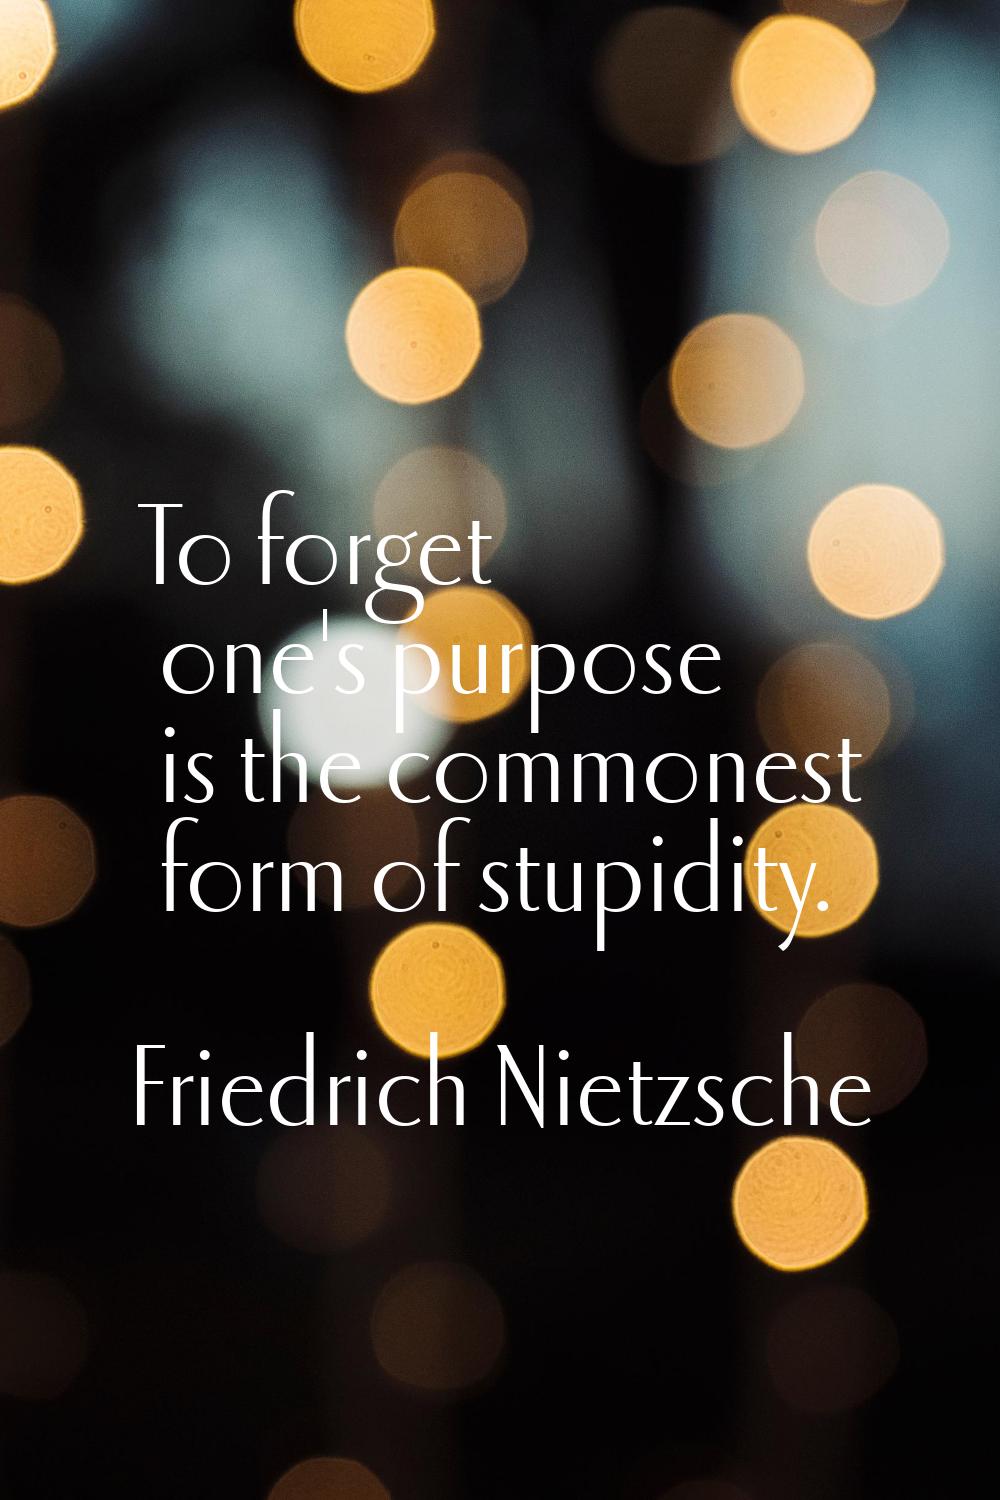 To forget one's purpose is the commonest form of stupidity.